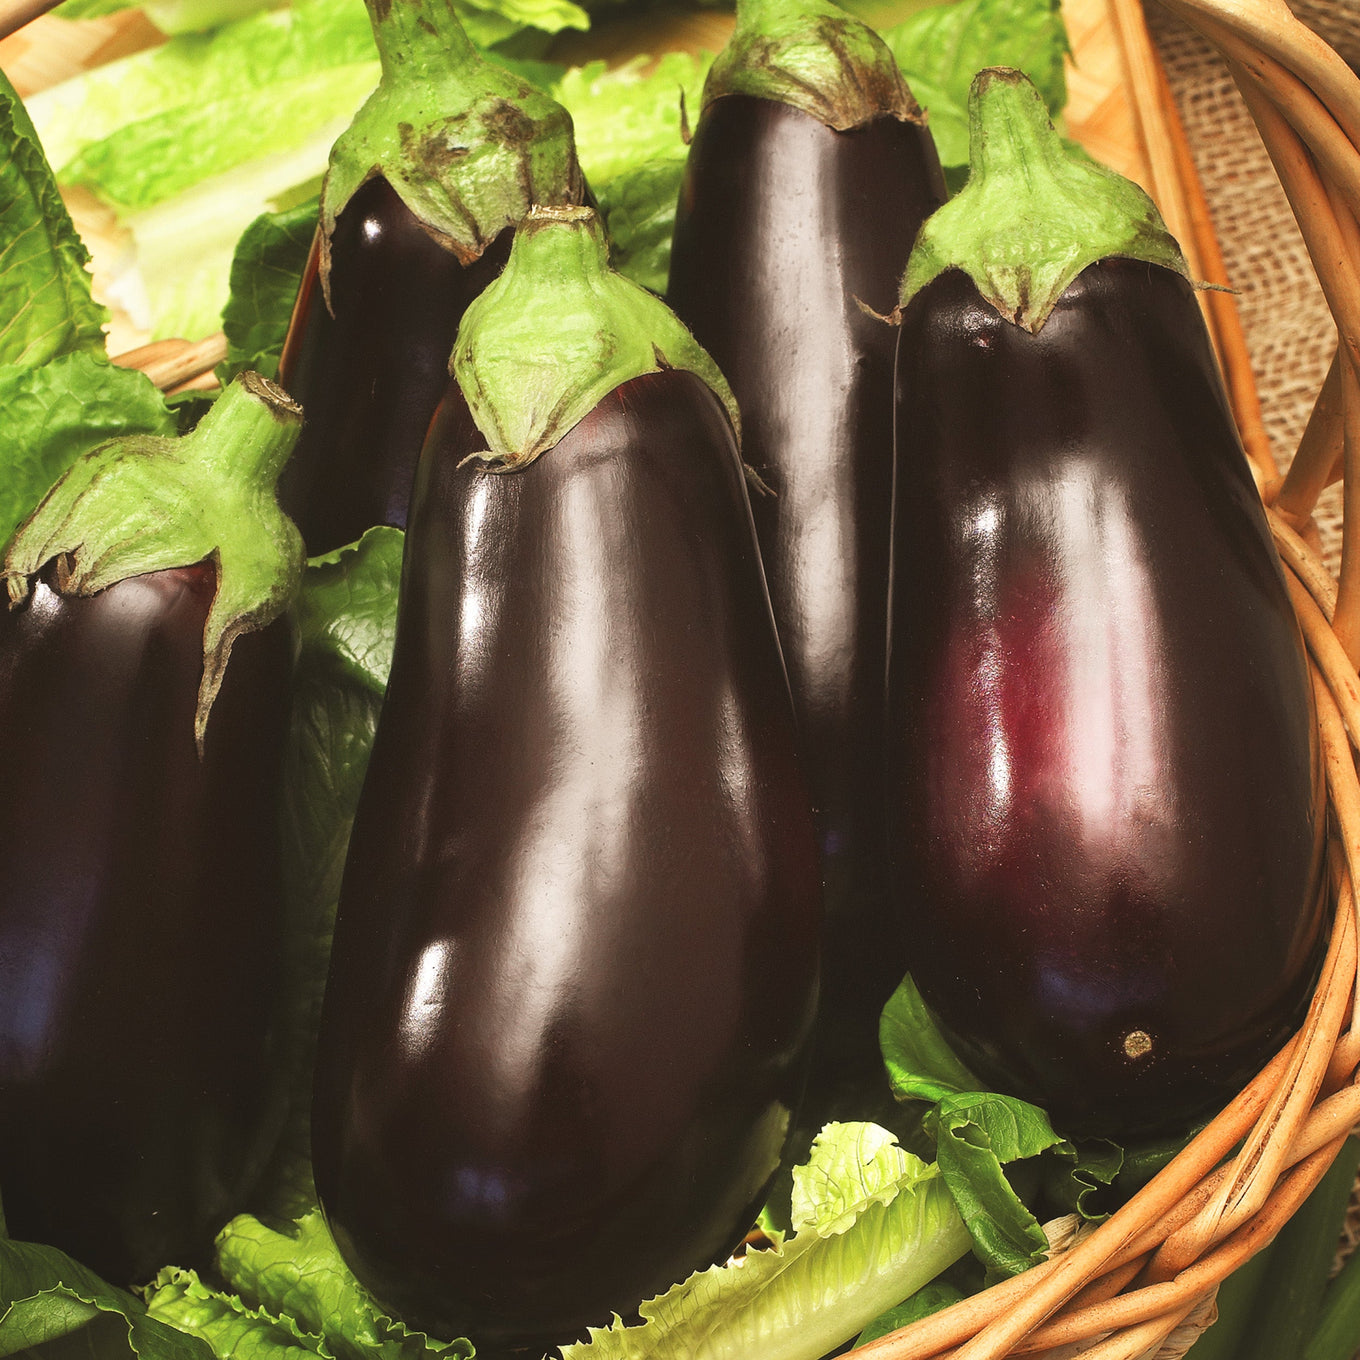 Heirloom Black Beauty Eggplant Seeds from Ferry Morse Home Gardening